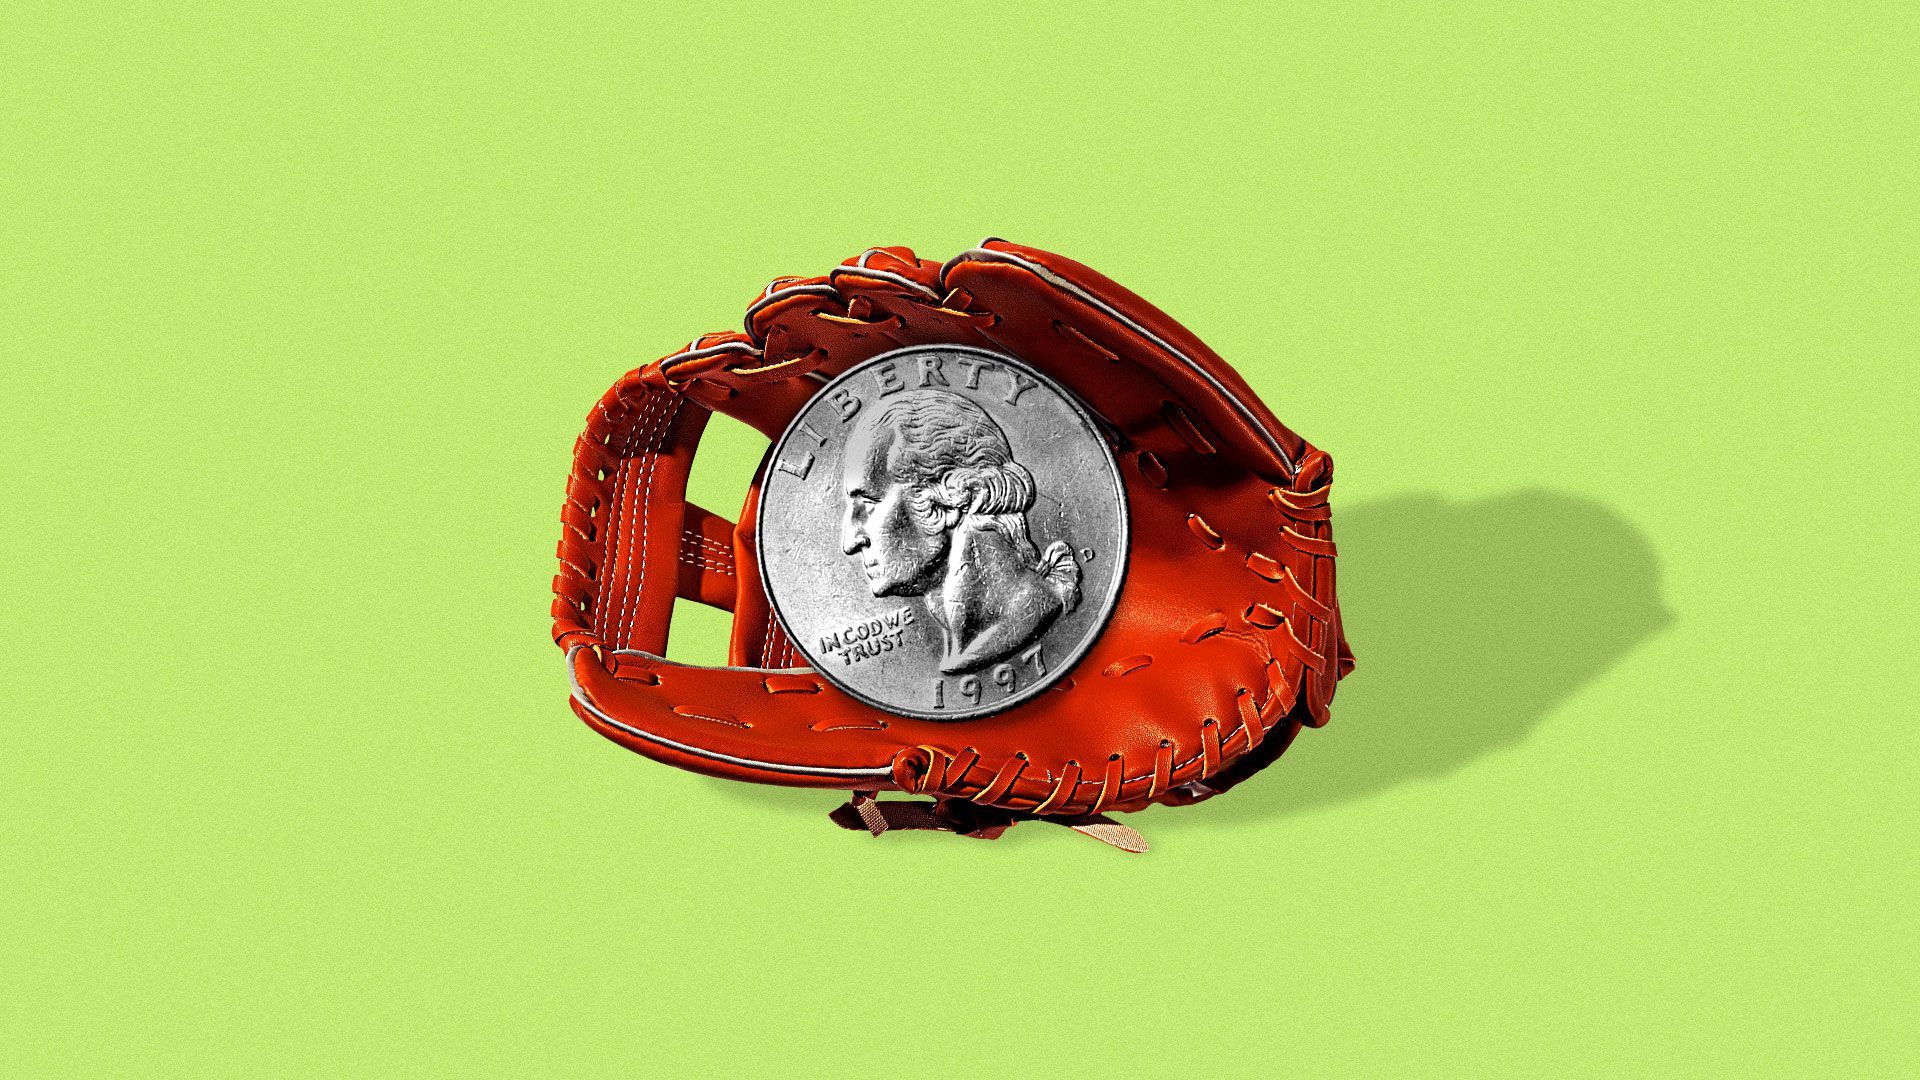 Illustration of baseball glove with a quarter replacing the baseball